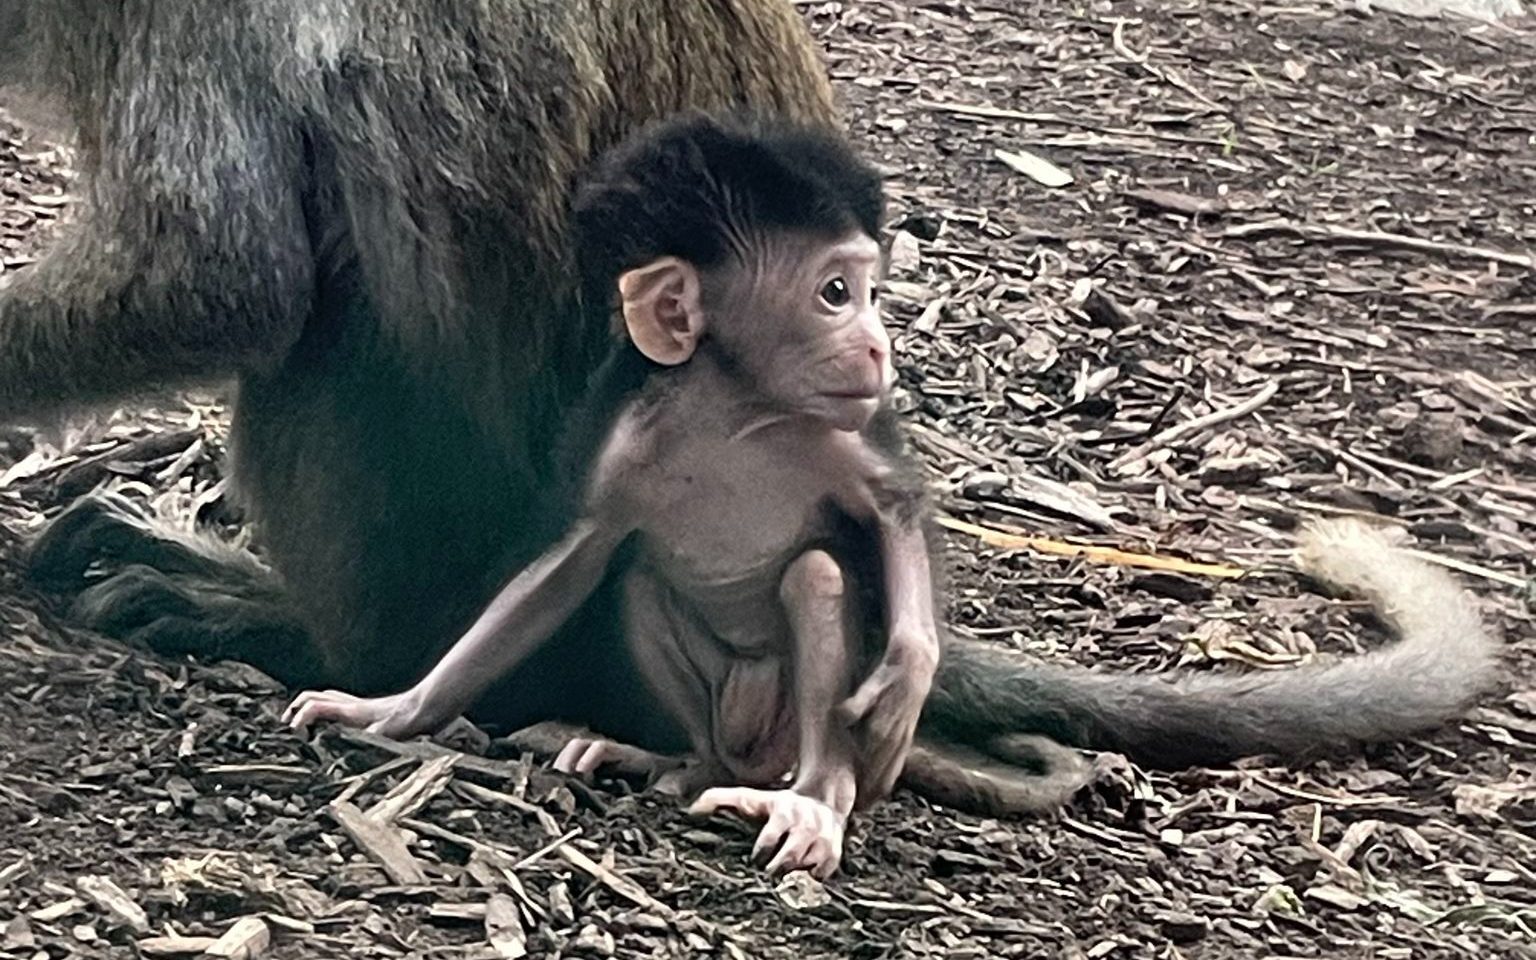 The Indianapolis Zoo is celebrating the birth of a long-tailed macaque.